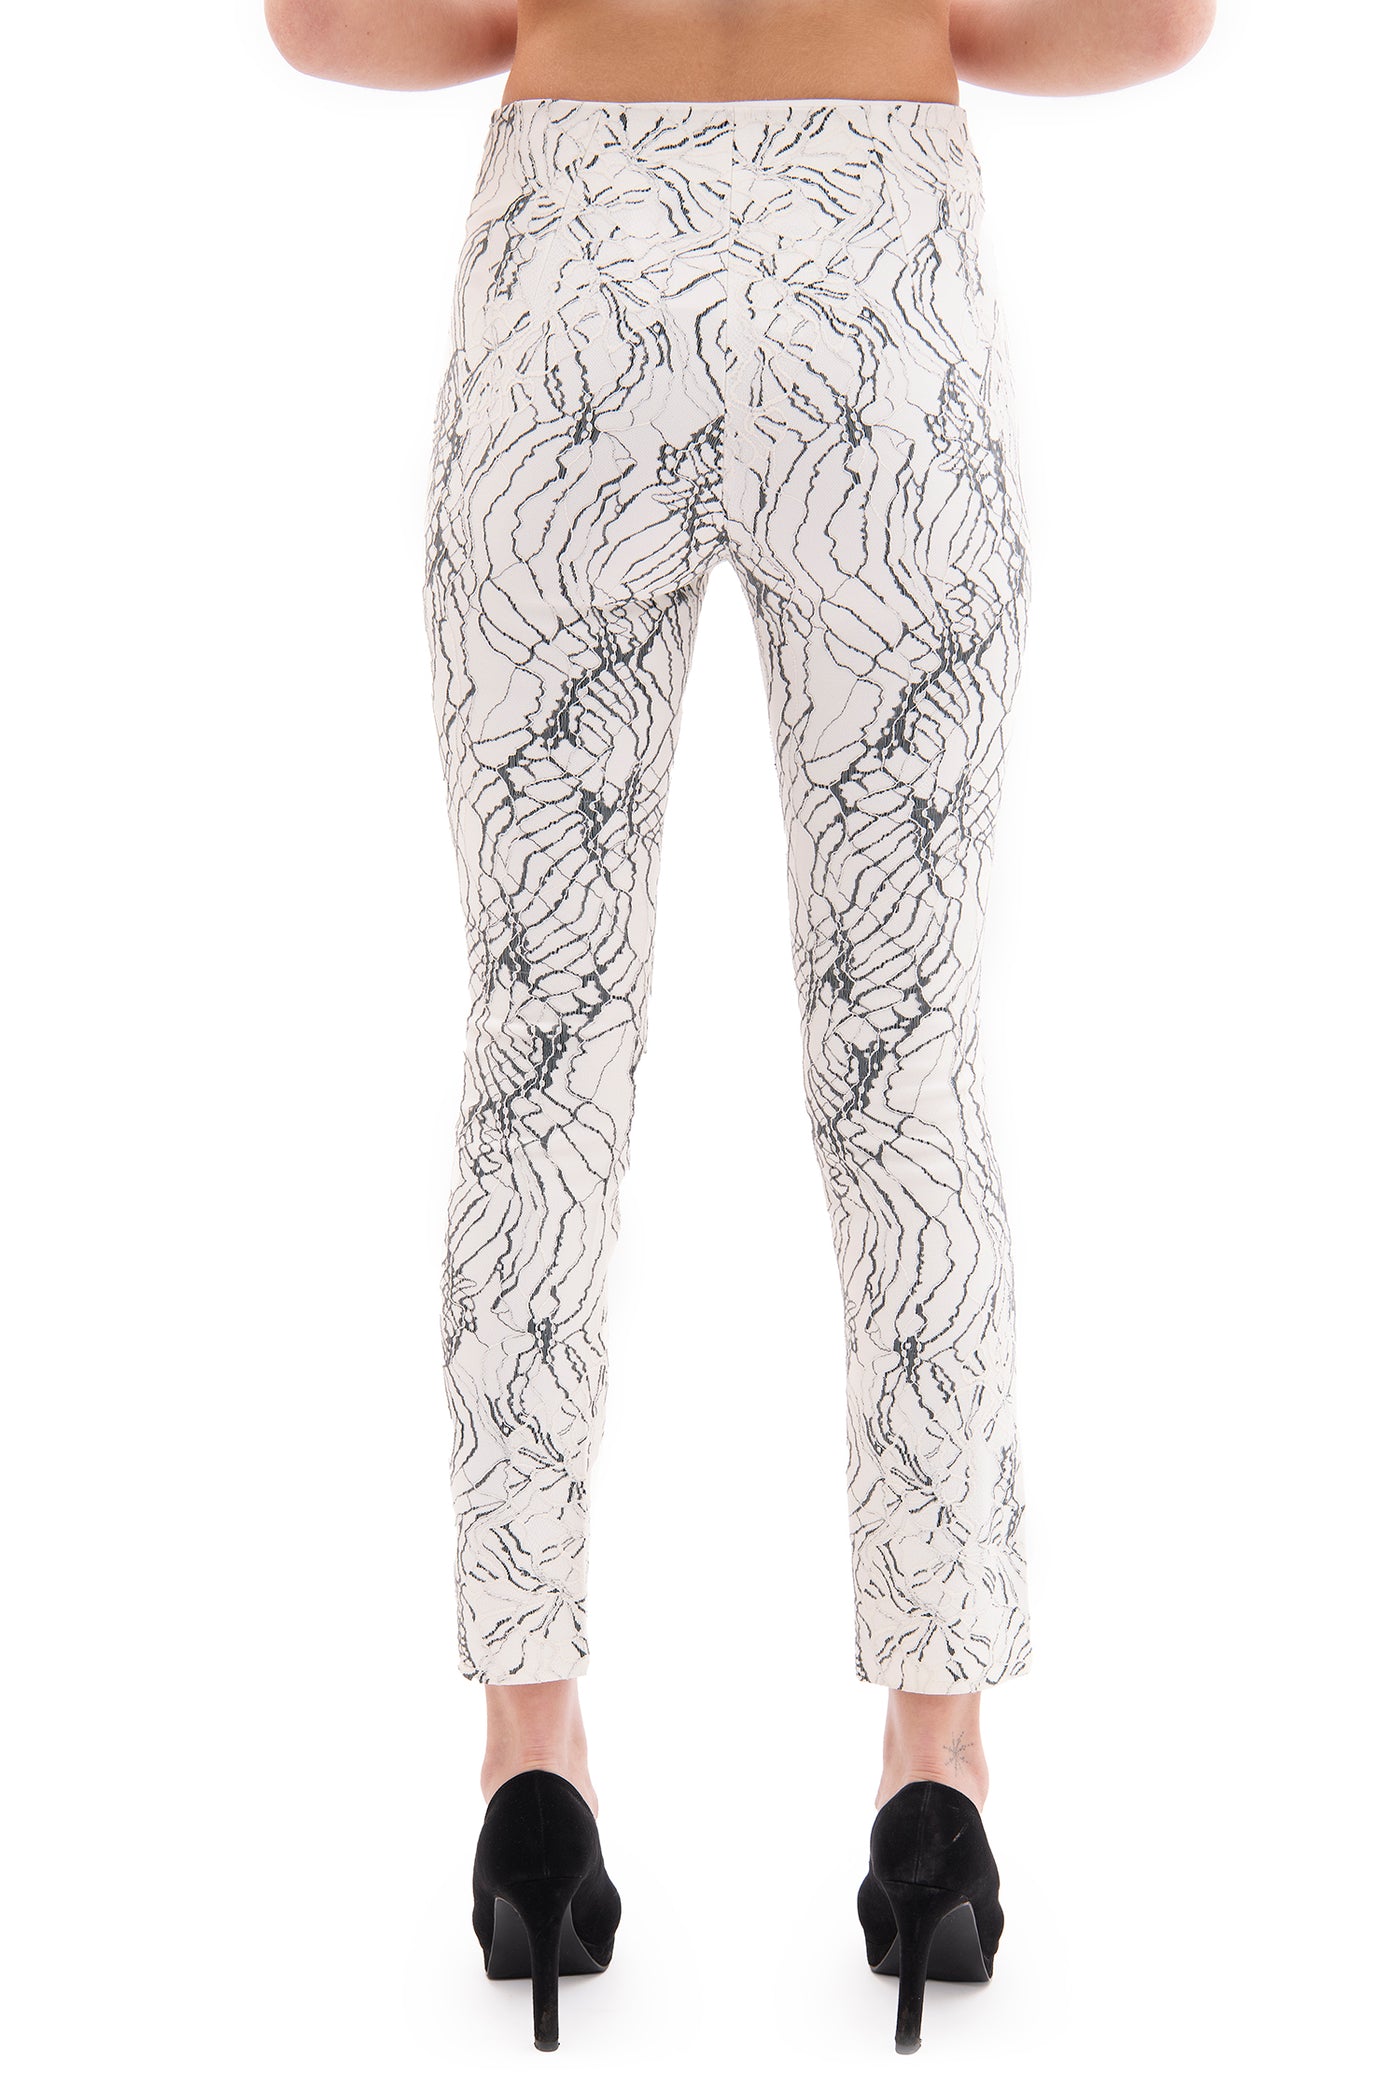 Safiyaa ivory and black patterned tailored trousers